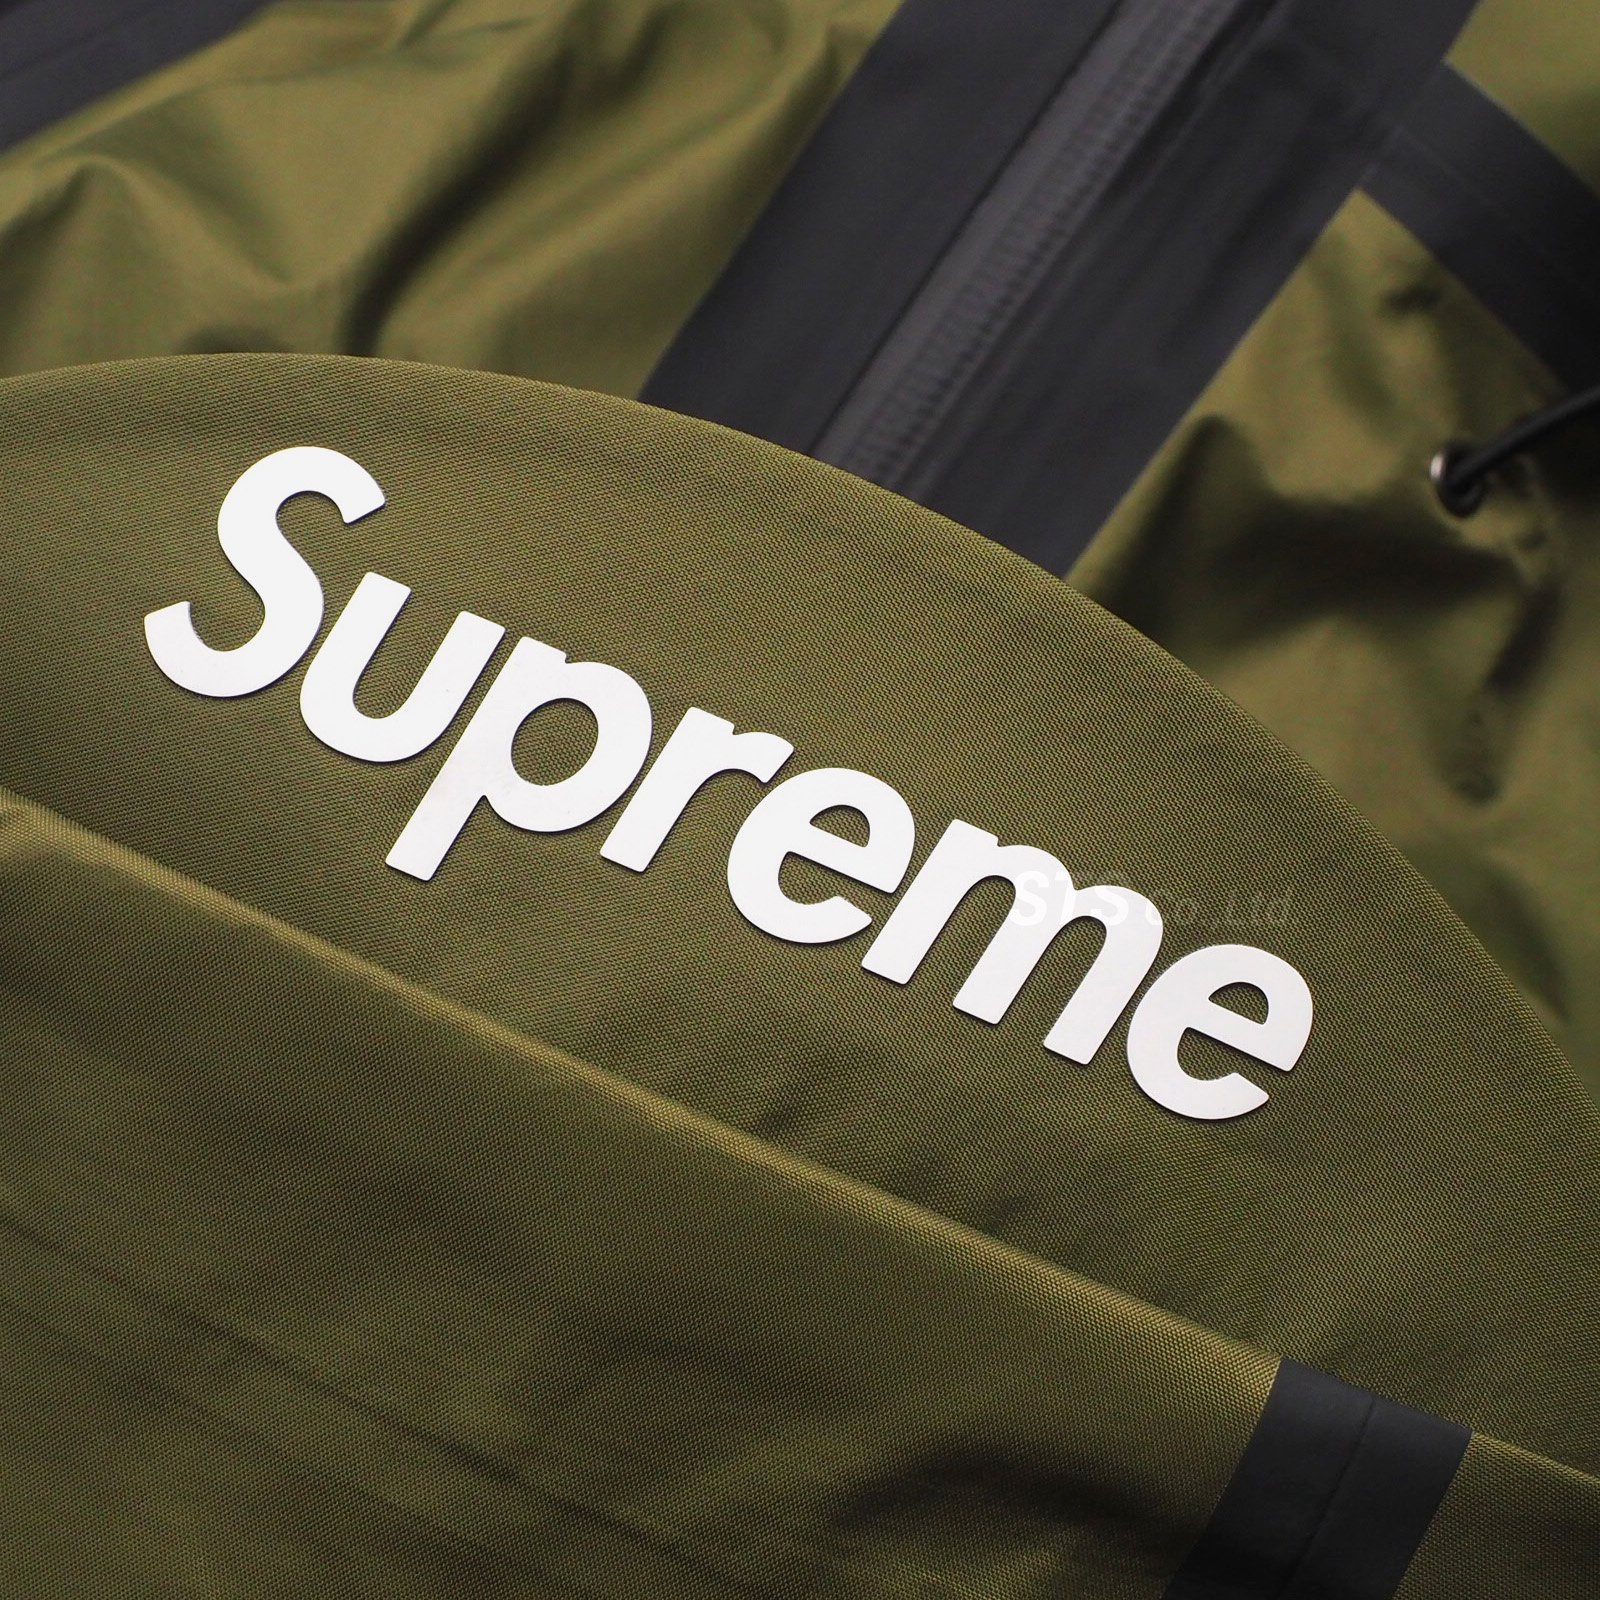 Supreme/The North Face Summit Series Outer Tape Seam Jacket